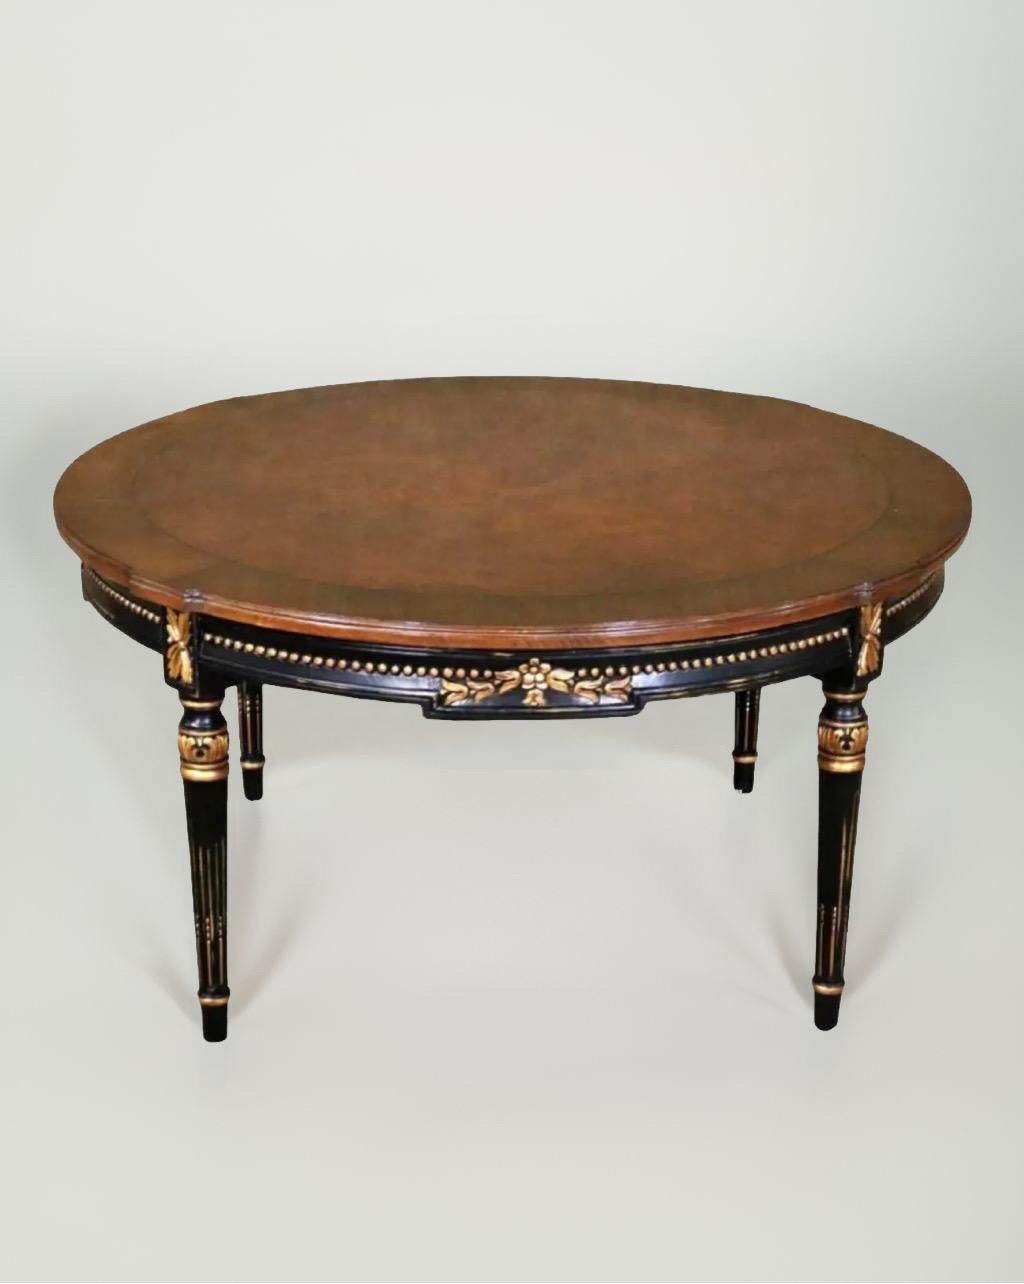 Magnificent Directoire cocktail table by Karges Furniture, early 2000s.

This exceptional table celebrates beautifully hand-carved details that include hand-painted gold leaf rosettes, a bead and floral carving on the apron, and fluted legs with a